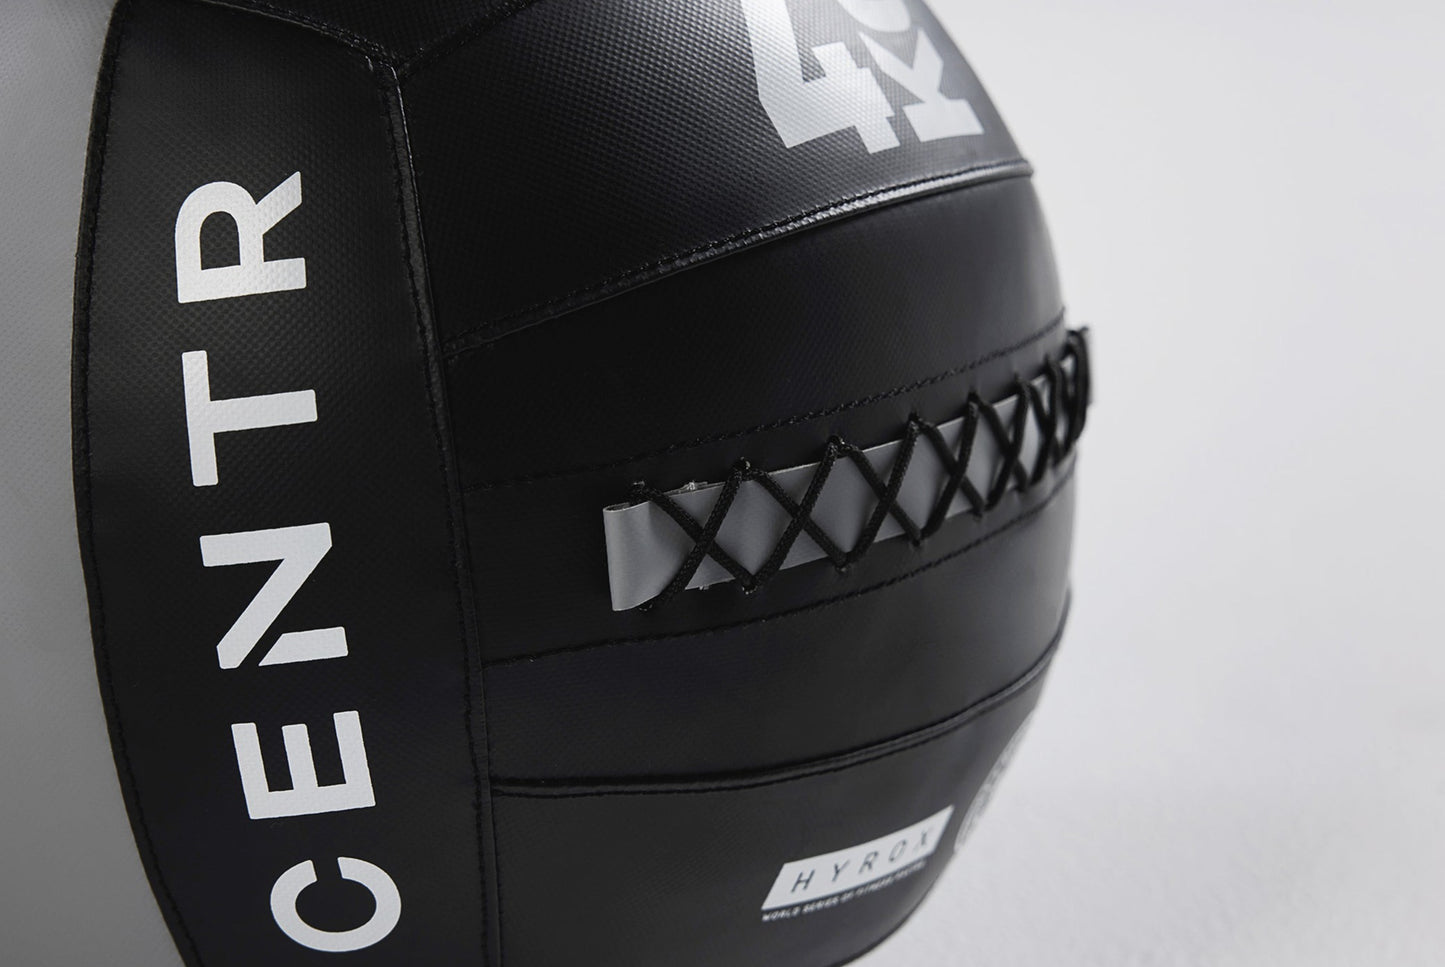 Centr x Hyrox 4 kg Competition Wall Ball